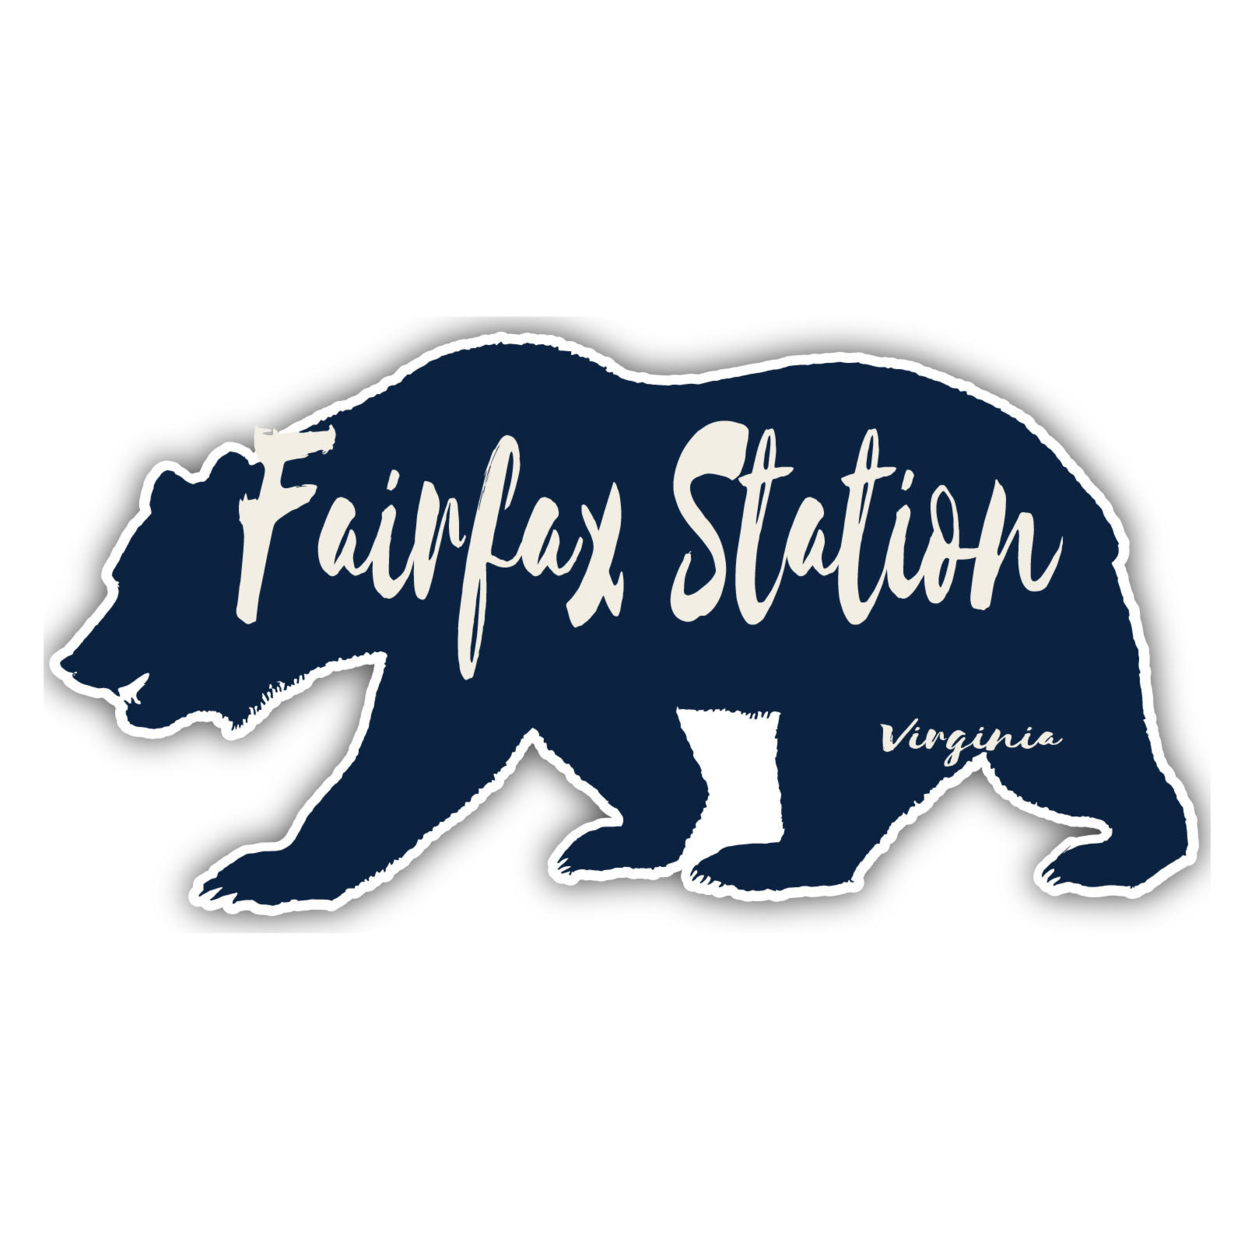 Fairfax Station Virginia Souvenir Decorative Stickers (Choose Theme And Size) - 4-Pack, 10-Inch, Bear